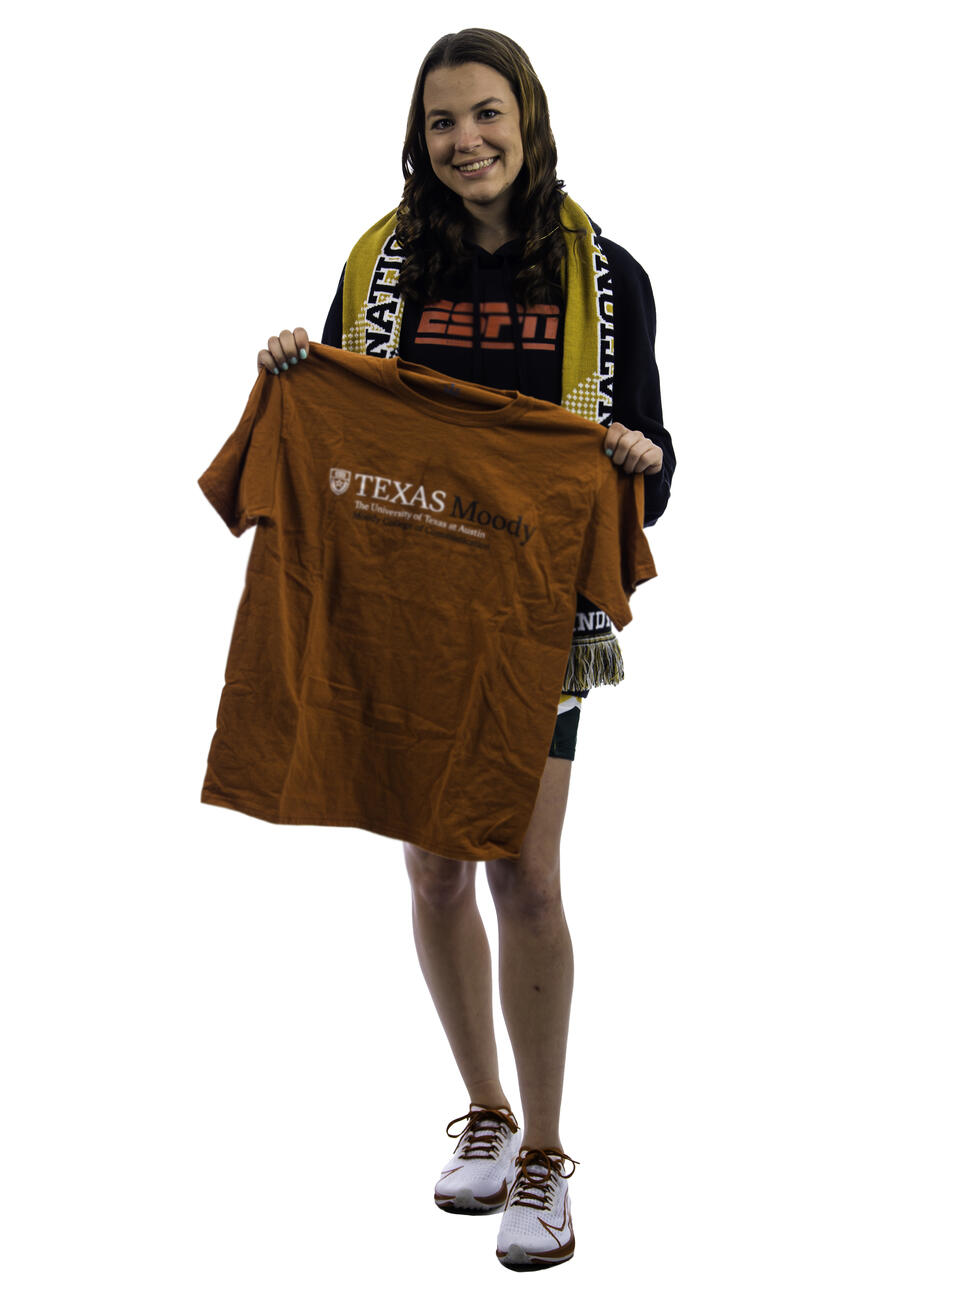 Kaylen Buschhorn poses by a table with a t-shirt for the University of Texas at Austin.